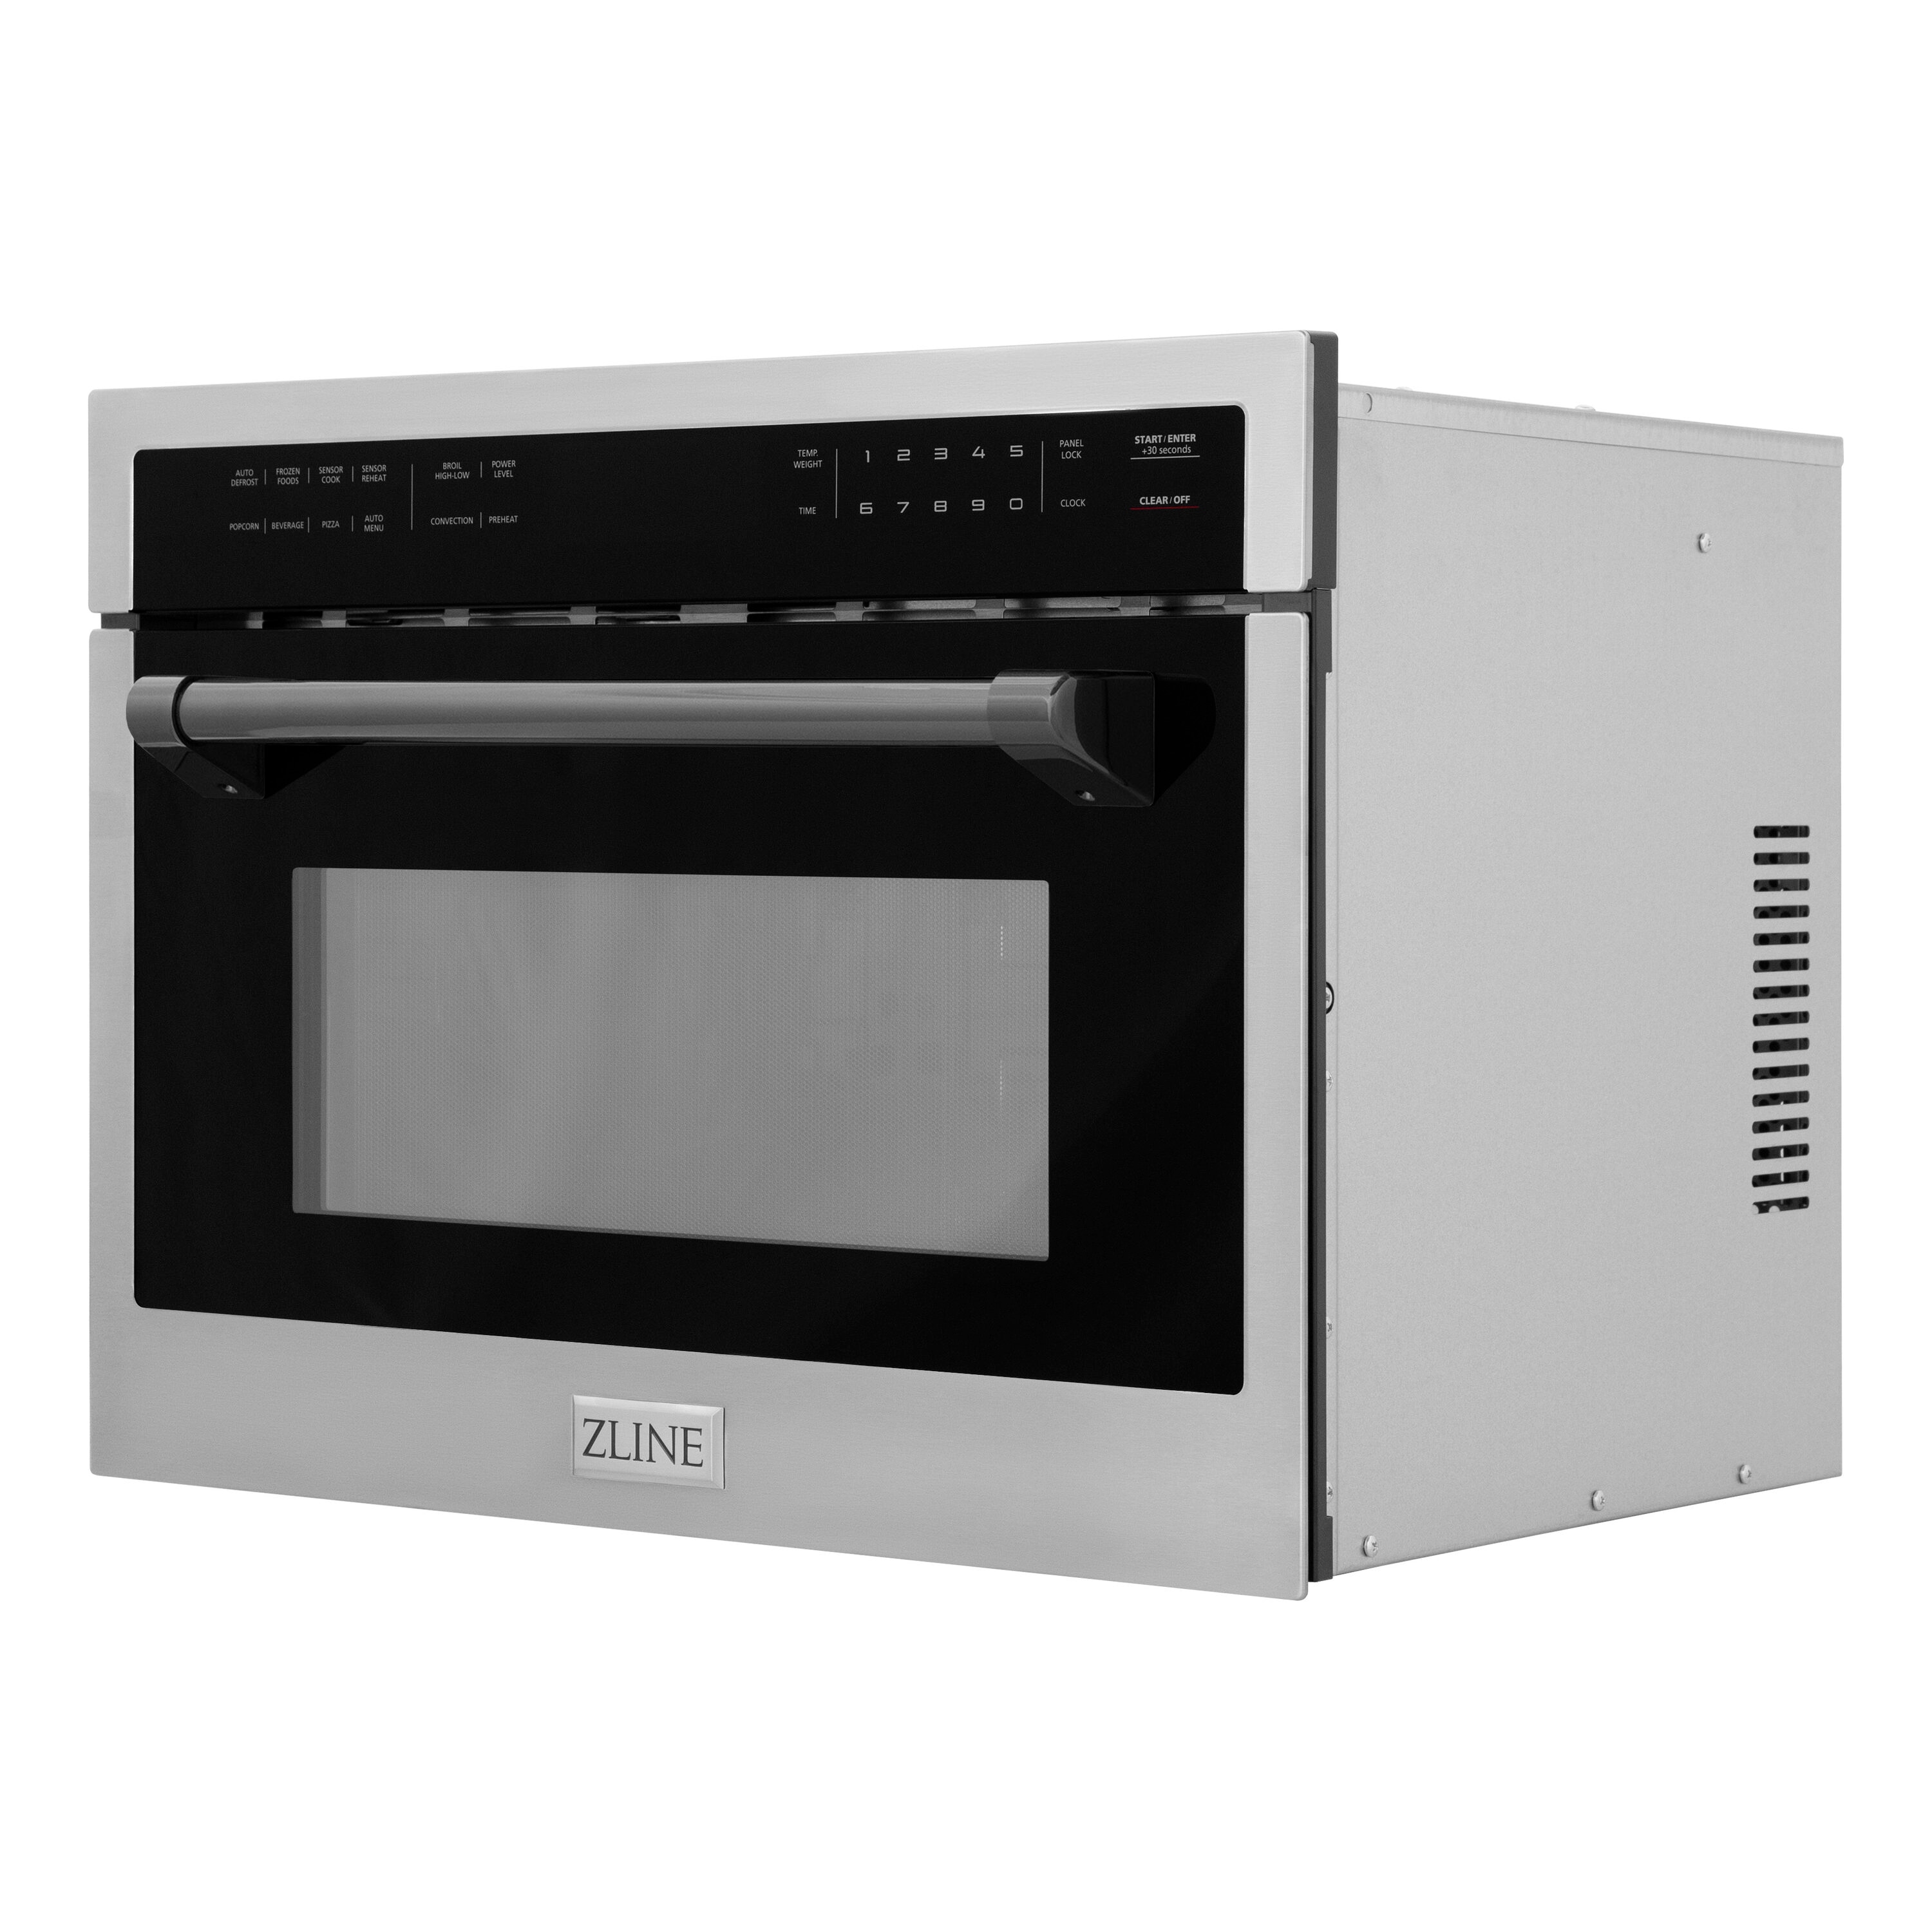 Wolf Gourmet - Elite 1.1 Cu. Ft. Convection Toaster Oven - STAINLESS STEEL  !